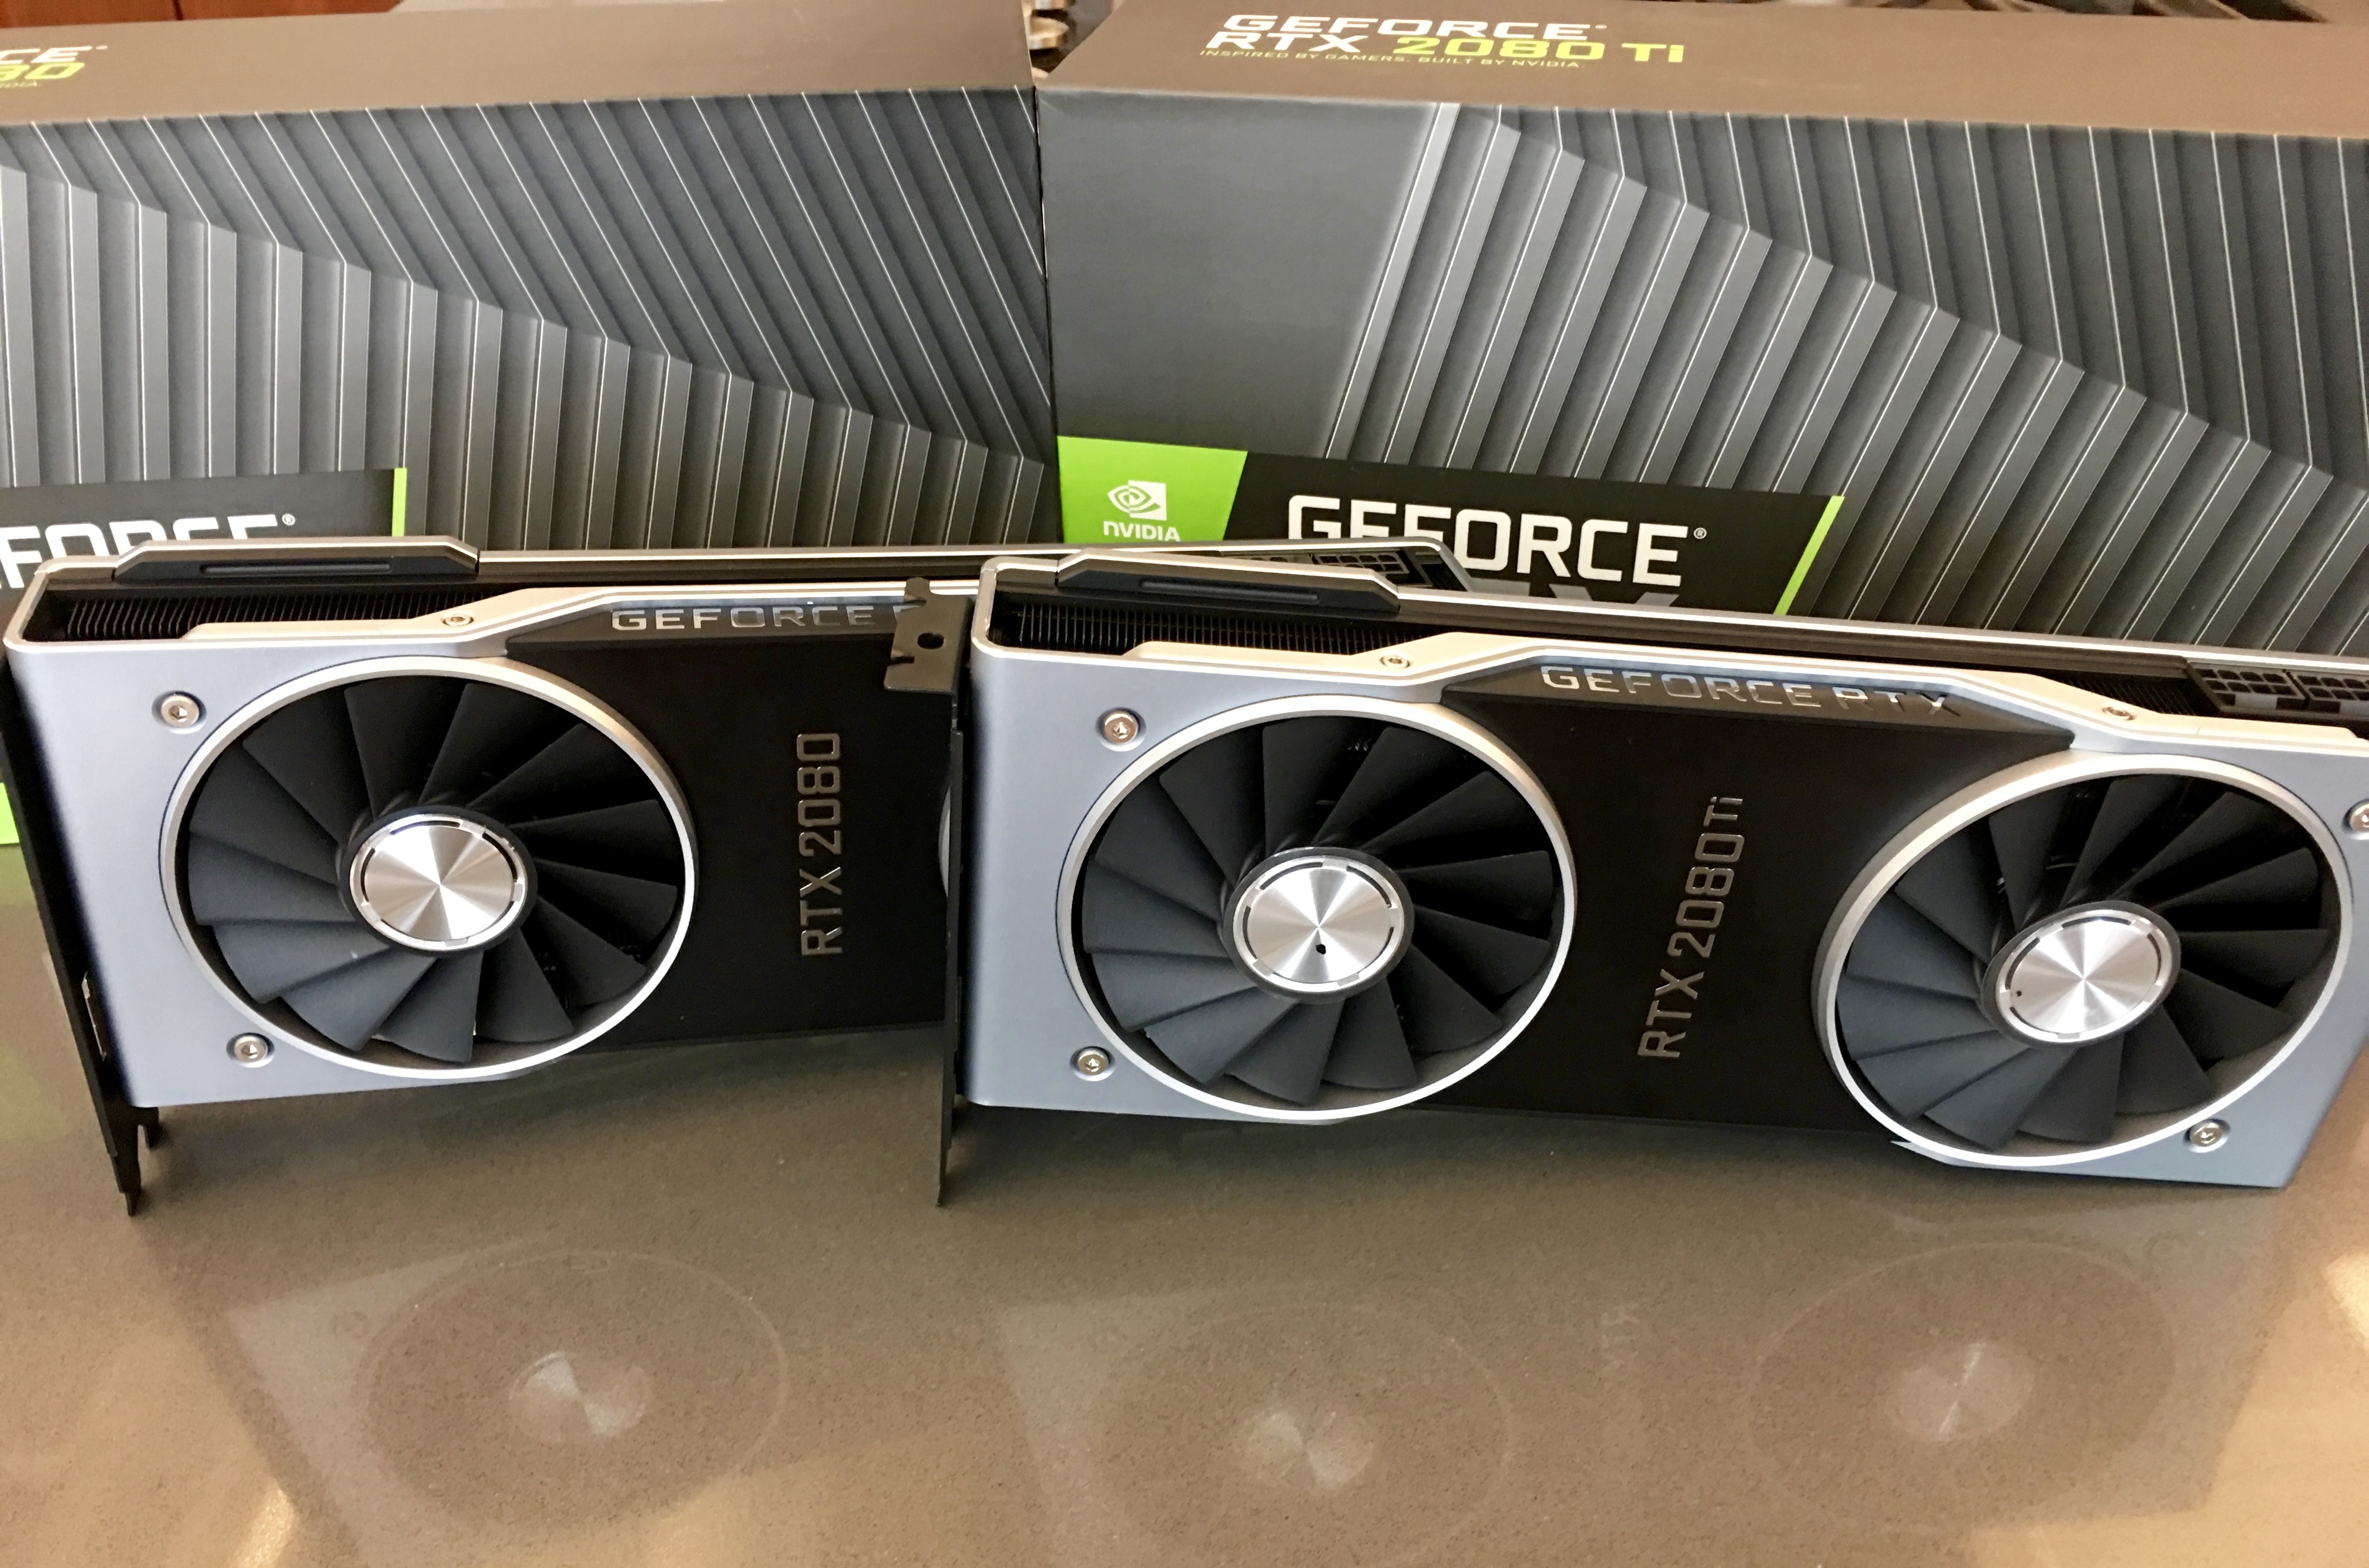 RTX 2080 And 2080 Ti Review: Can These Video Cards Handle 4K 60 FPS? - GameSpot